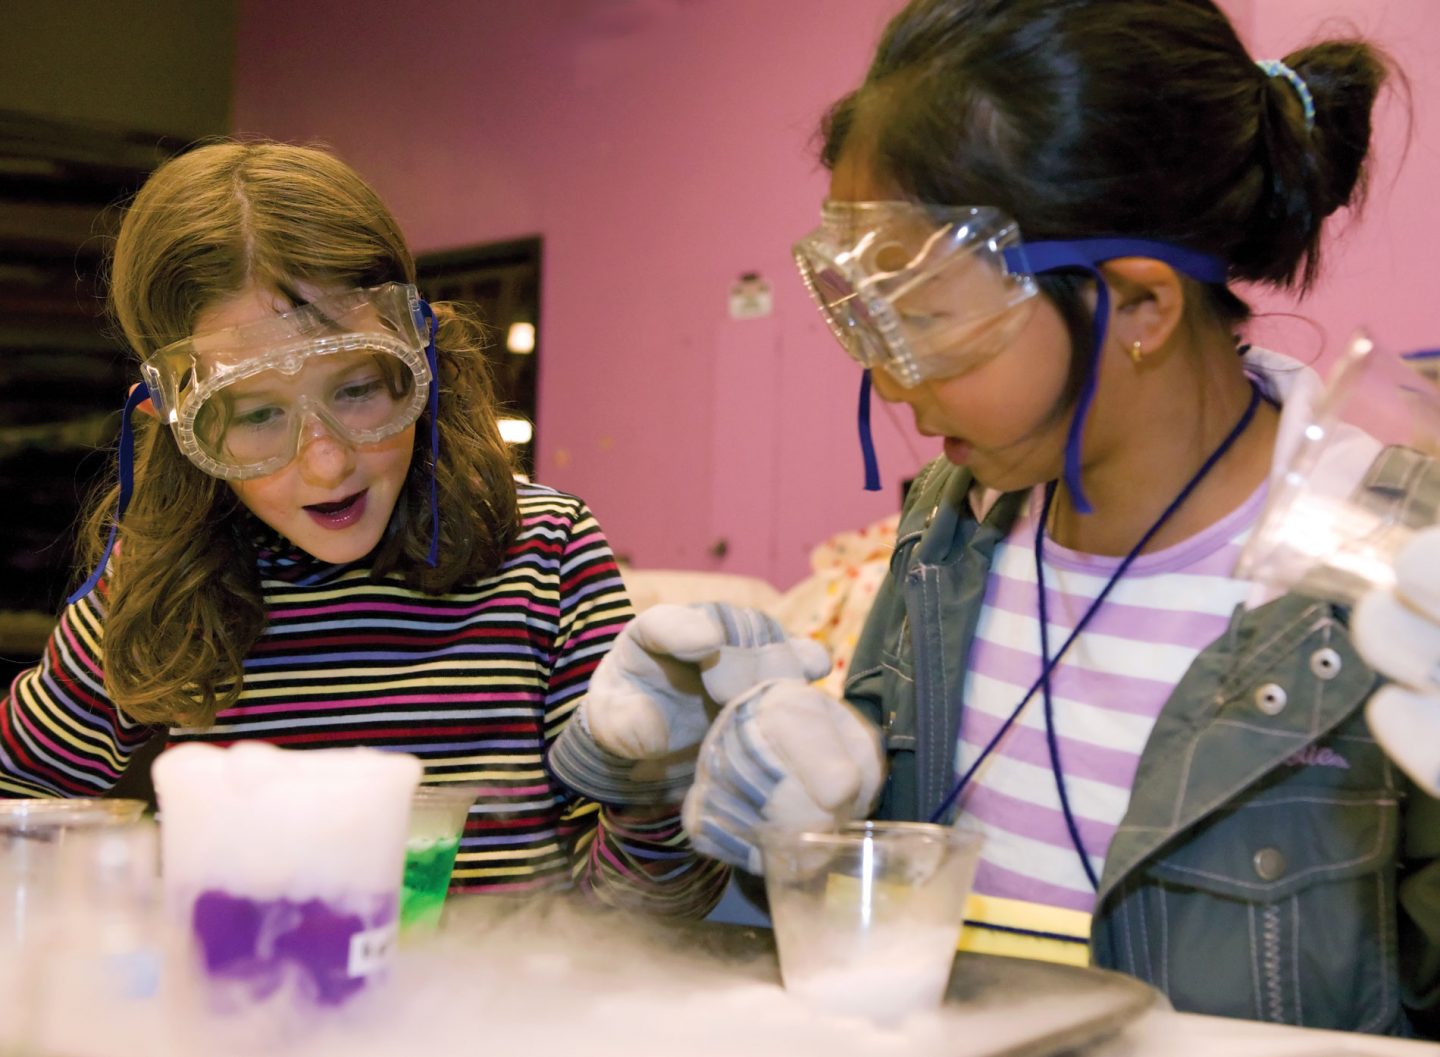 Two young people wearing safety glasses and gloves are working on a science experiment examining foaming liquid